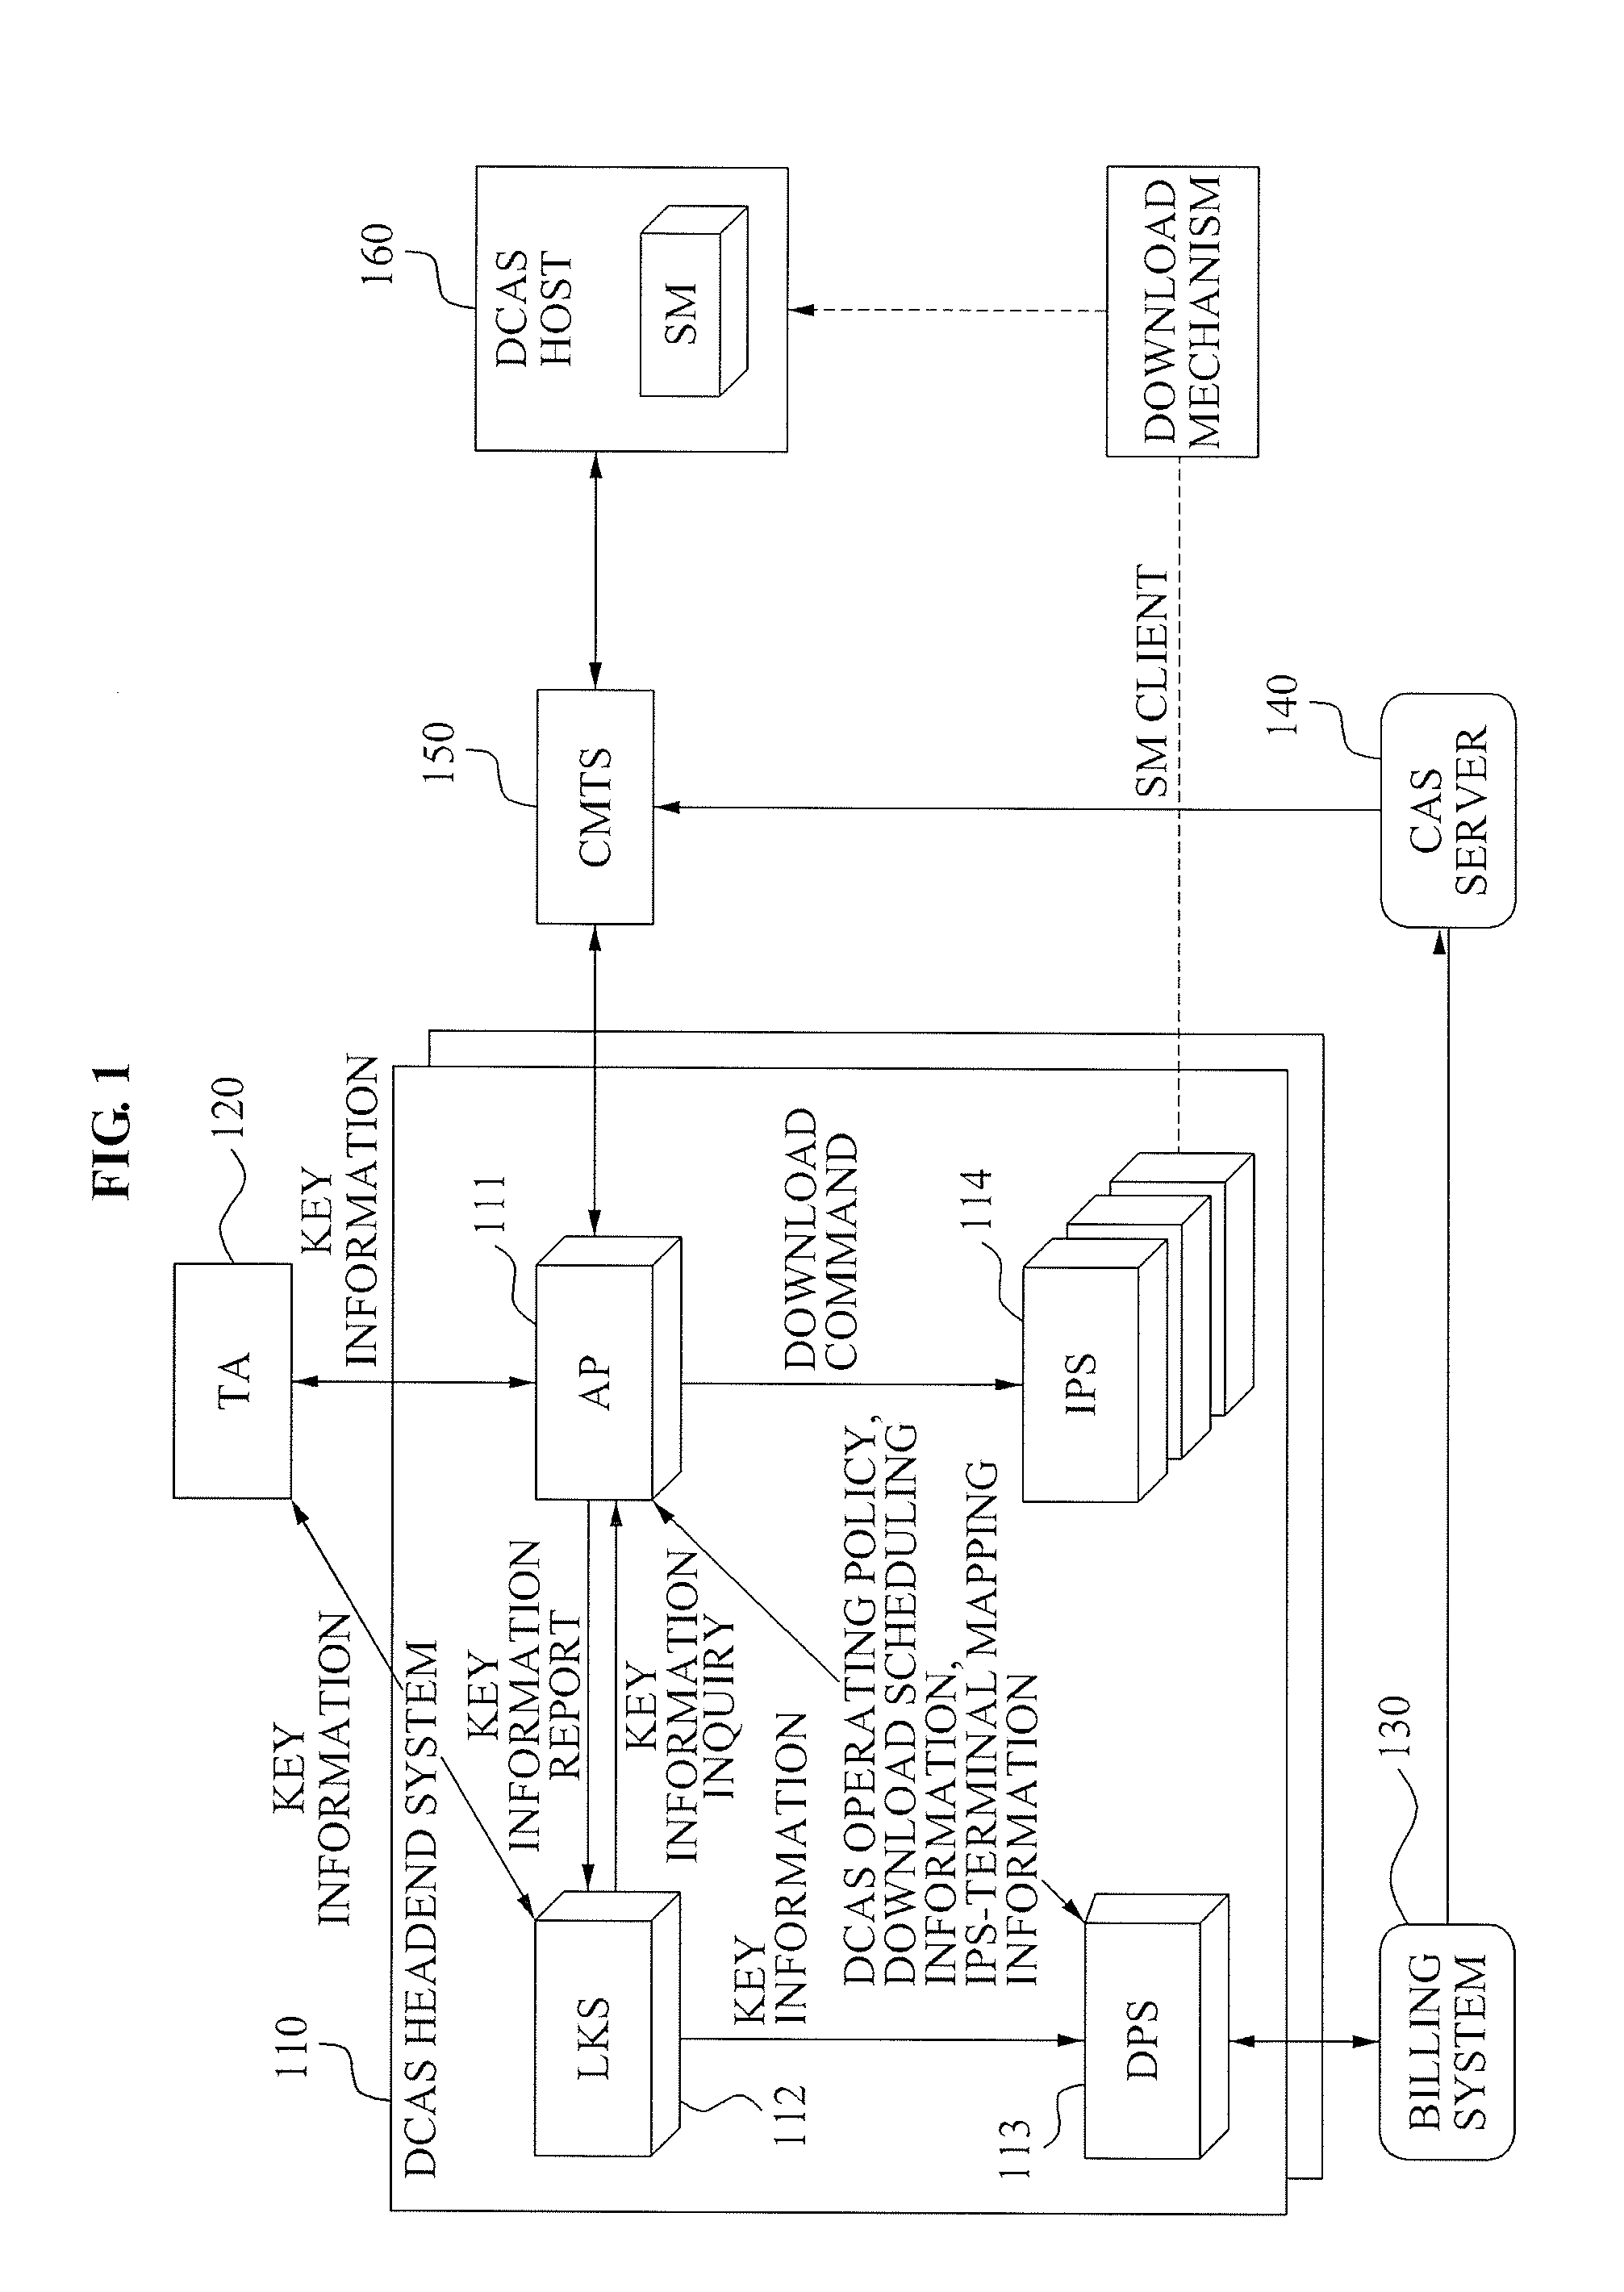 Headend system for downloadable conditional access service and method of operating the same